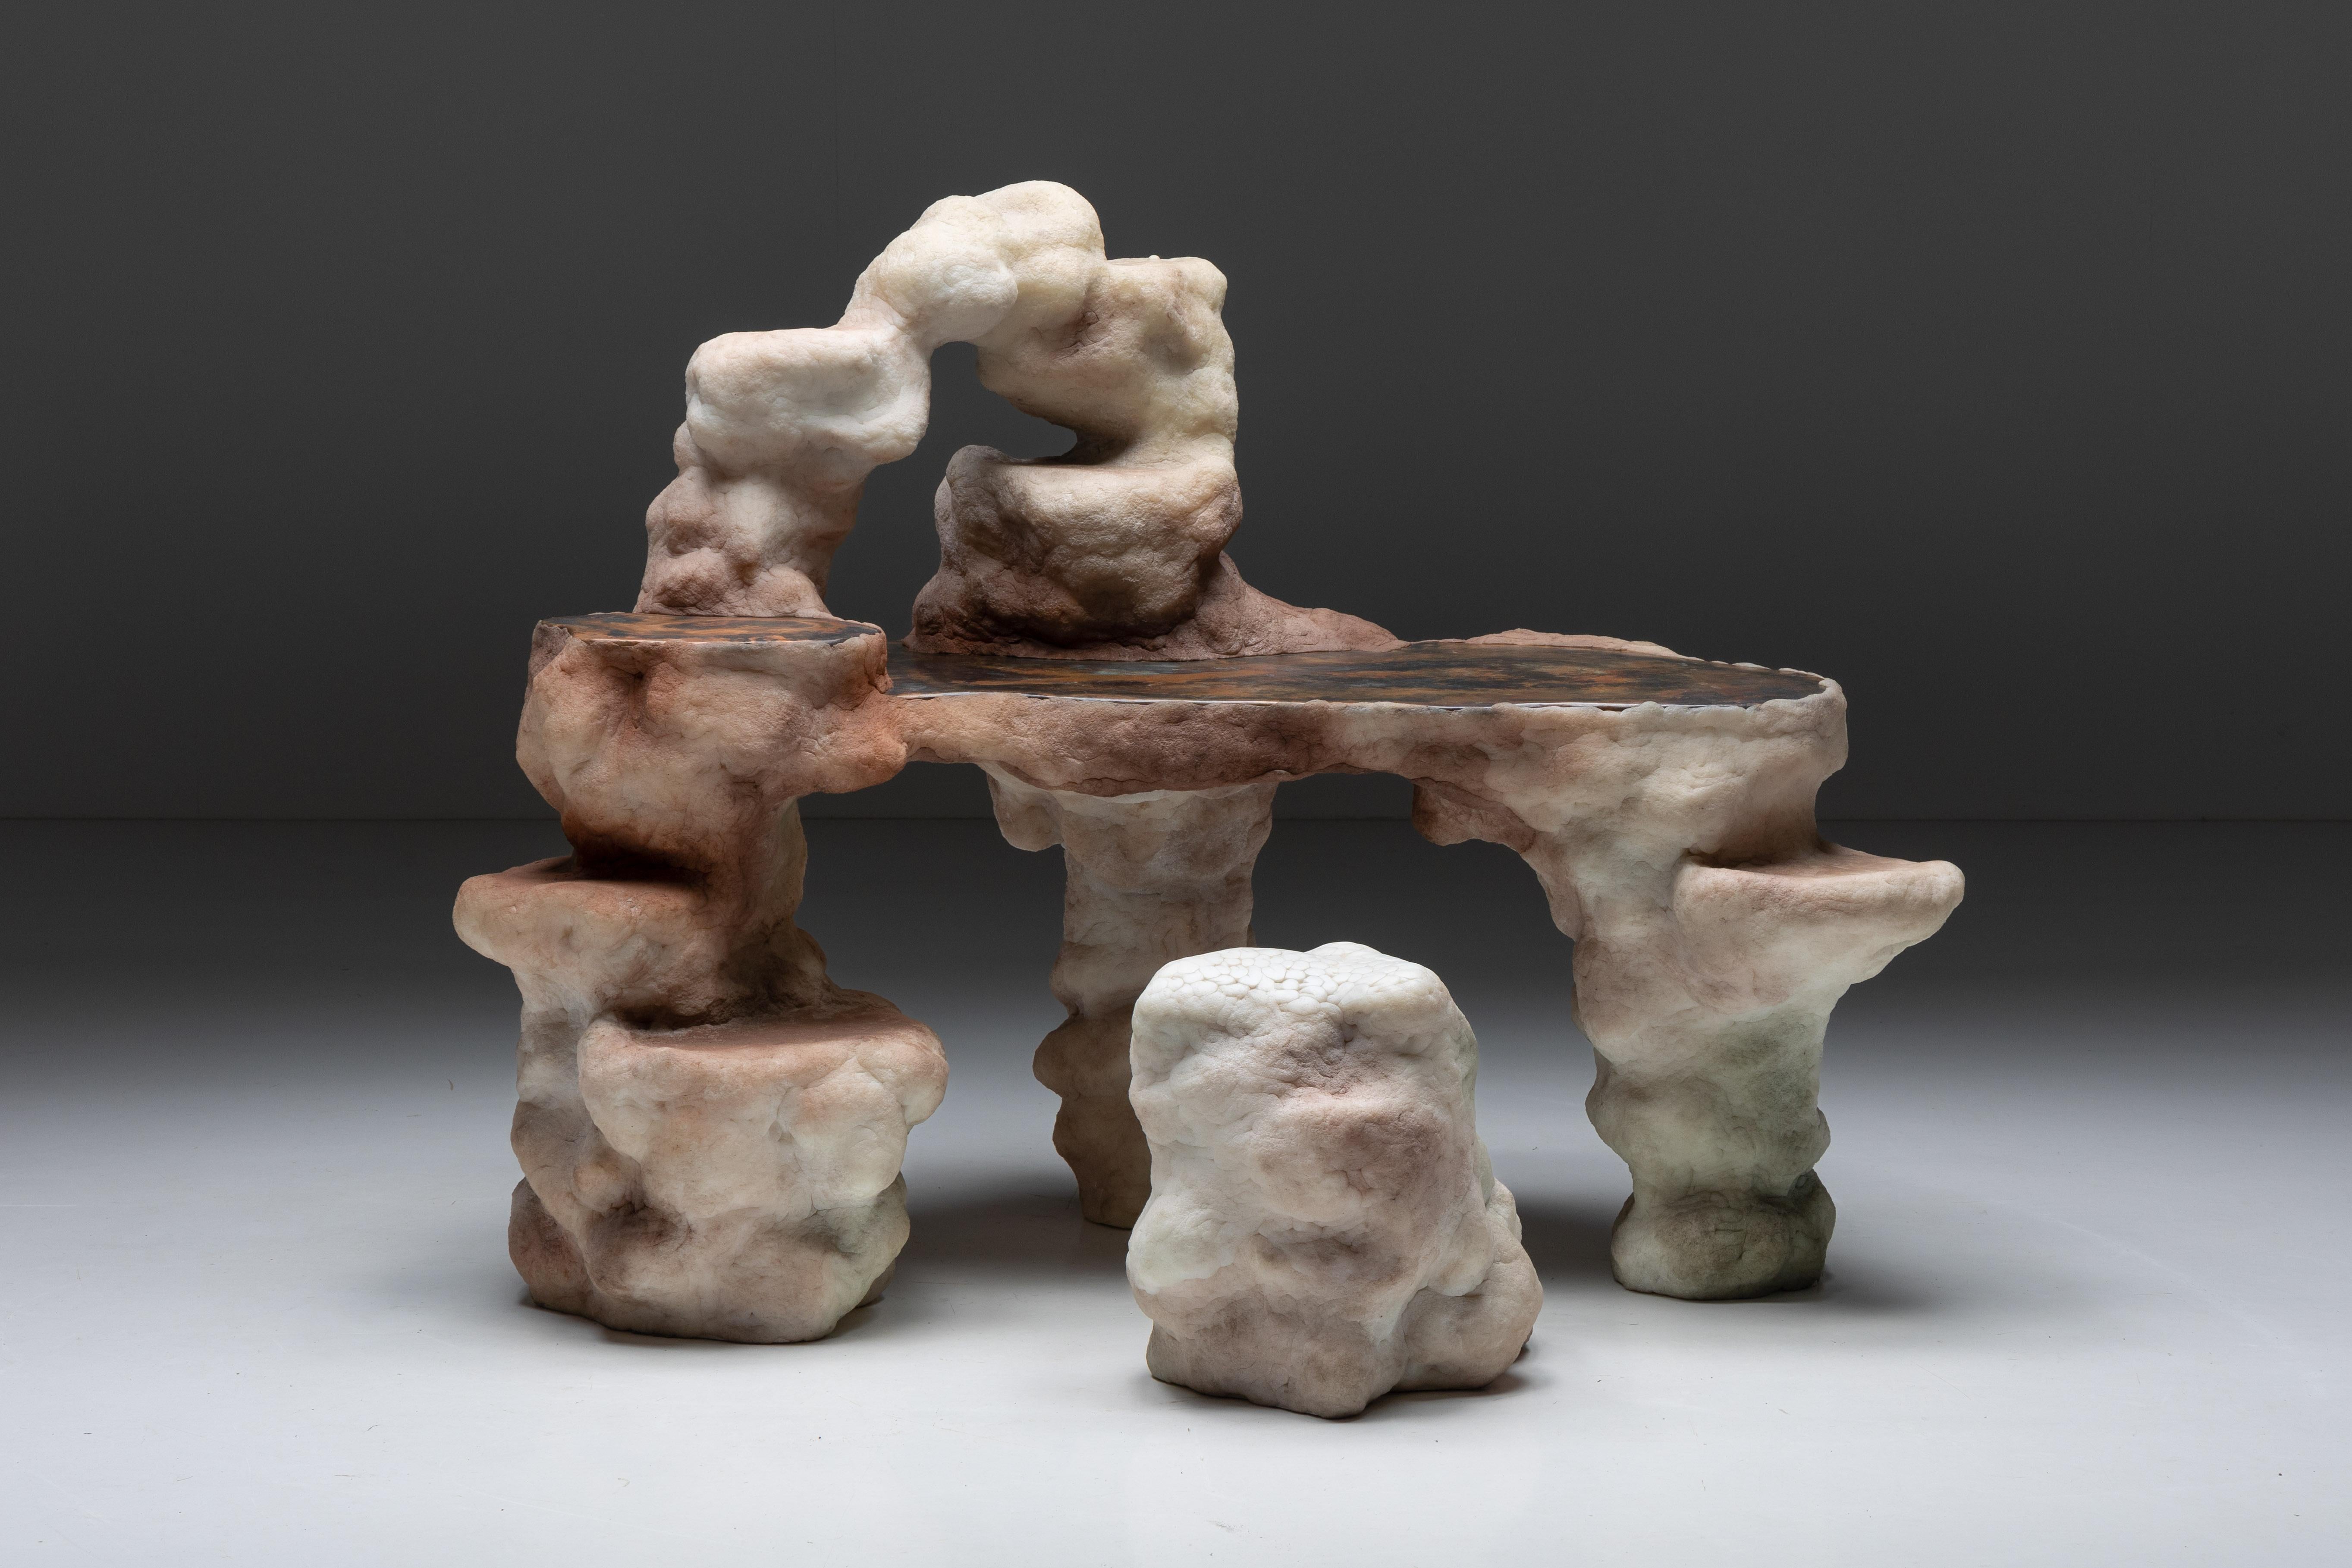 Elissa Lacoste's 'I Dream of Megalithic Times' series: lithic desk and desk chair. Composed of various speleothem-like shapes emerging from silicone skins infused with earthly pigments. This collection of functional art pieces challenges